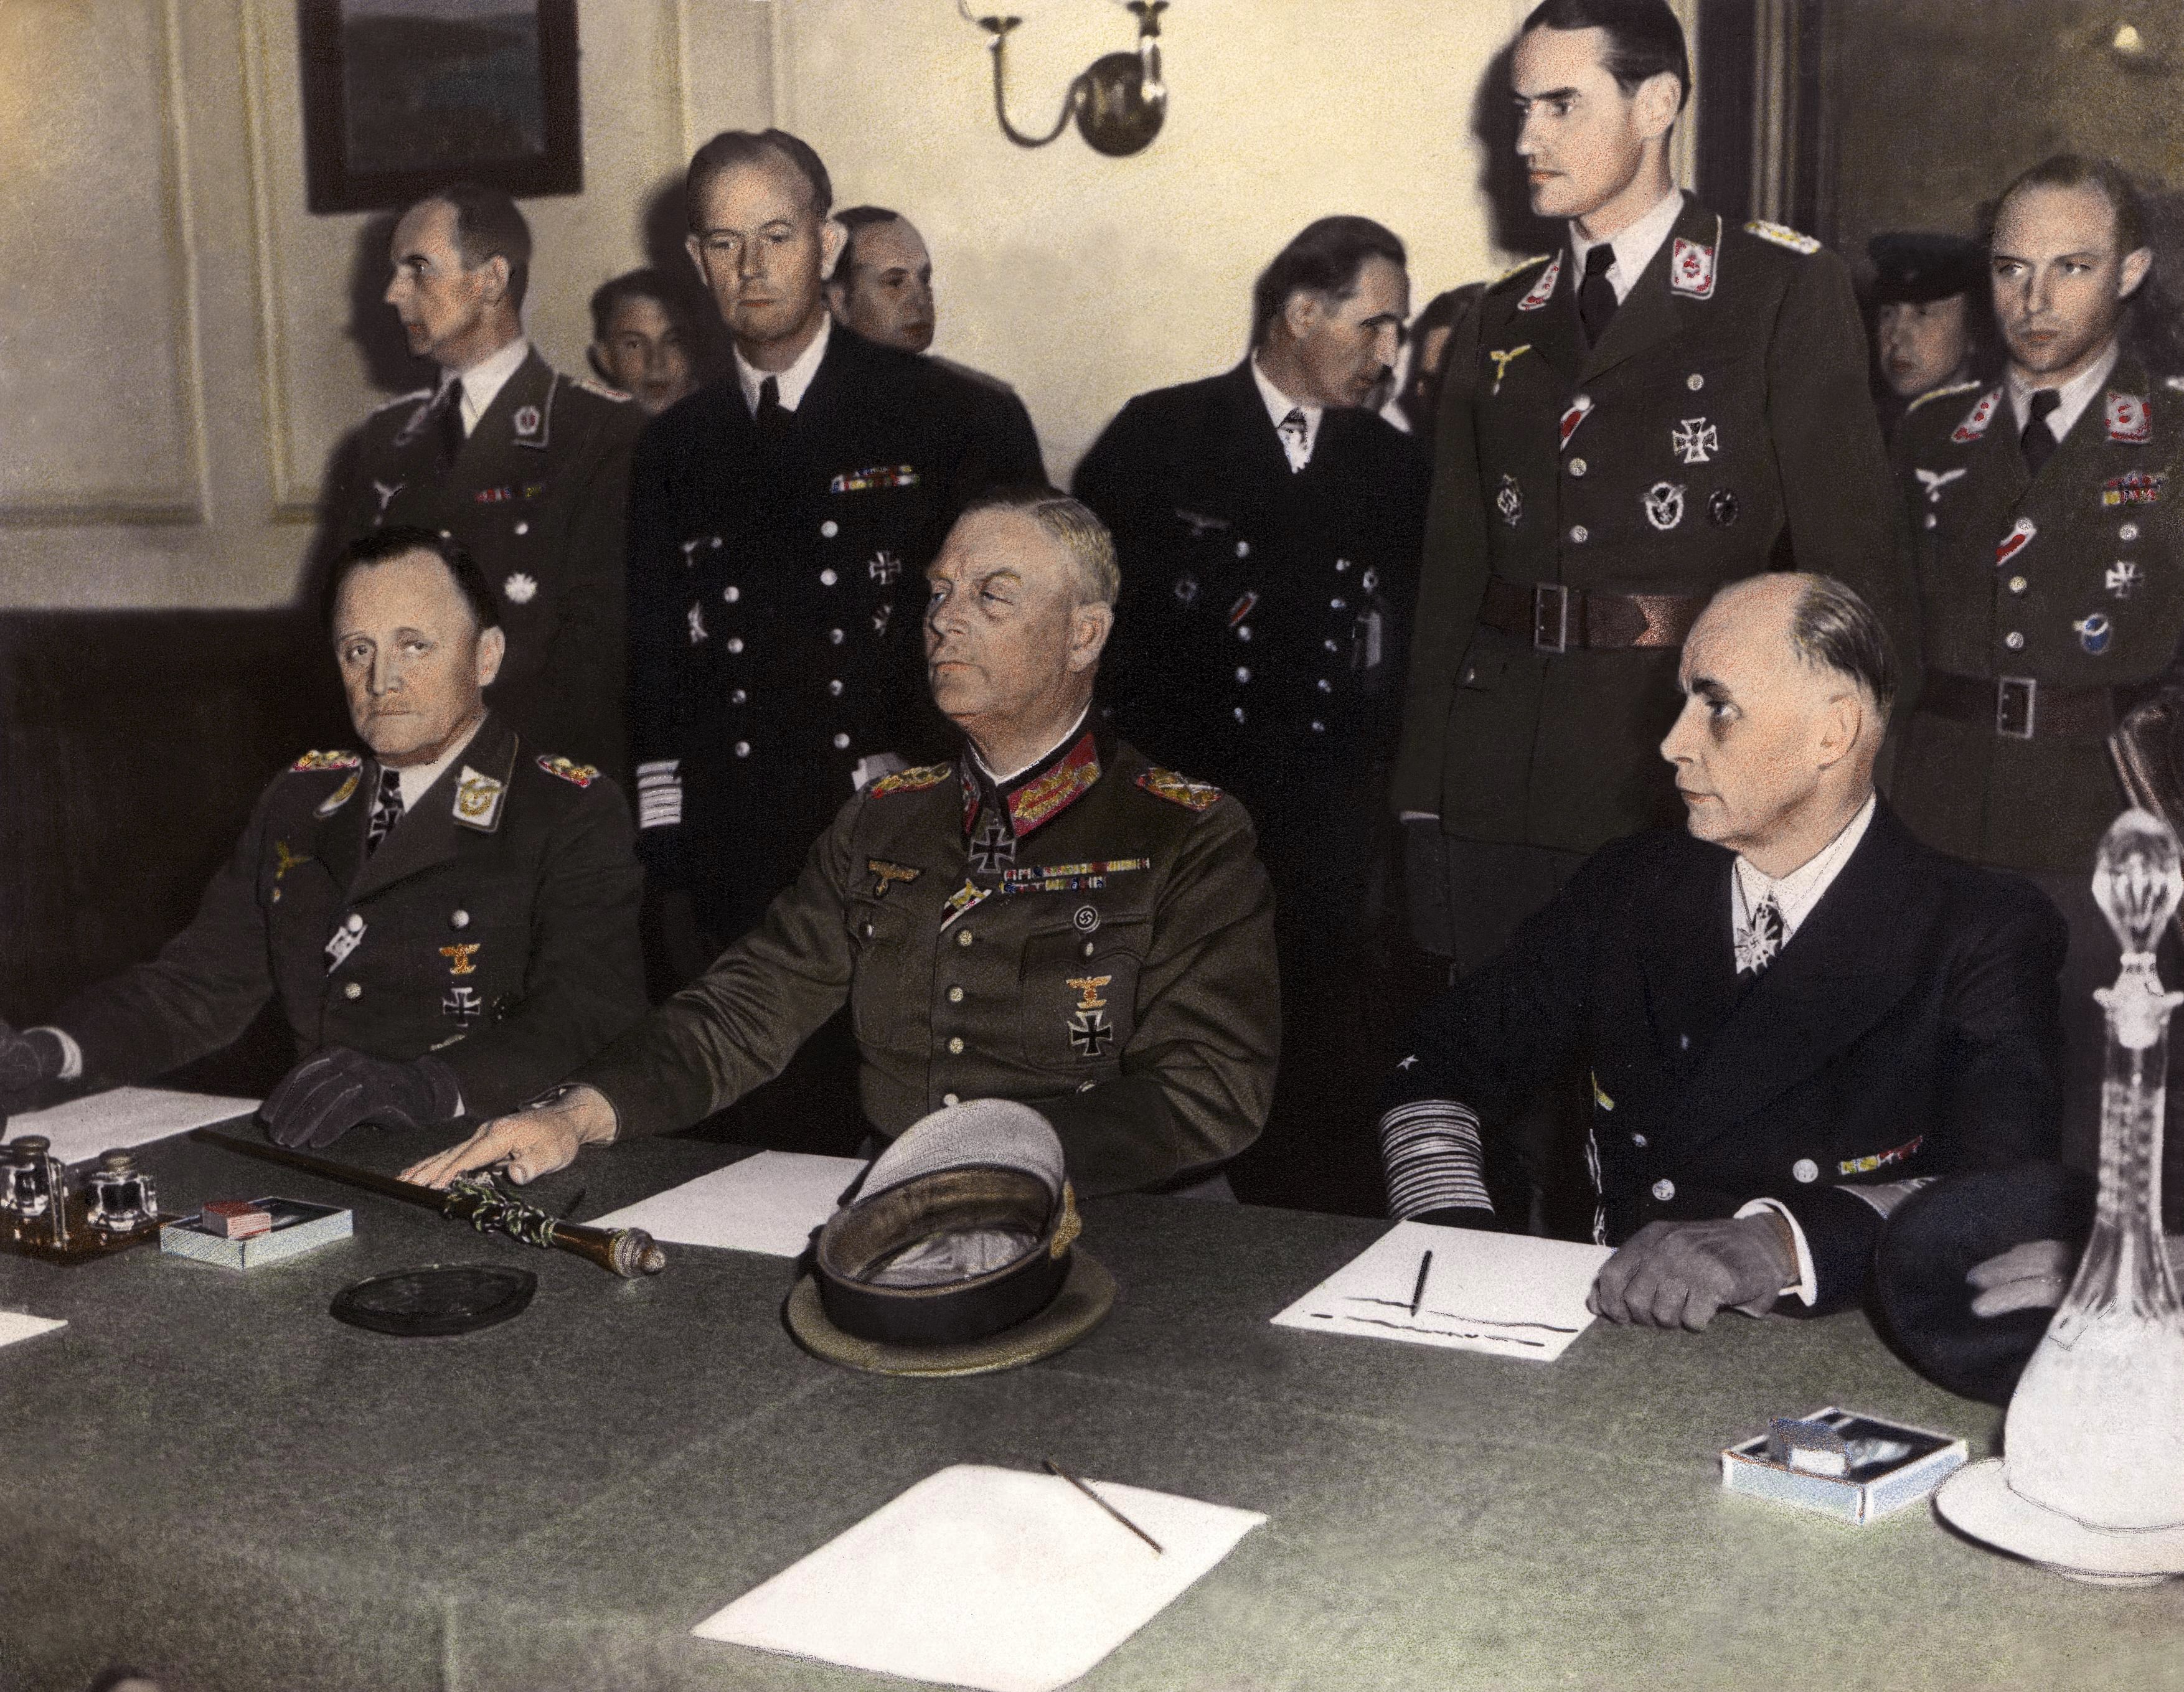 General P.H. STUMPF (left), representing the LUFTWAFFE, Marshall KEITEL (center), from the WEHRMACHT and Admiral George Hans FRIEDEBURG (right), from the German Navy signing an act of surrender of Germany at the Russian headquarters of Karlshortst, North-East of Berlin.